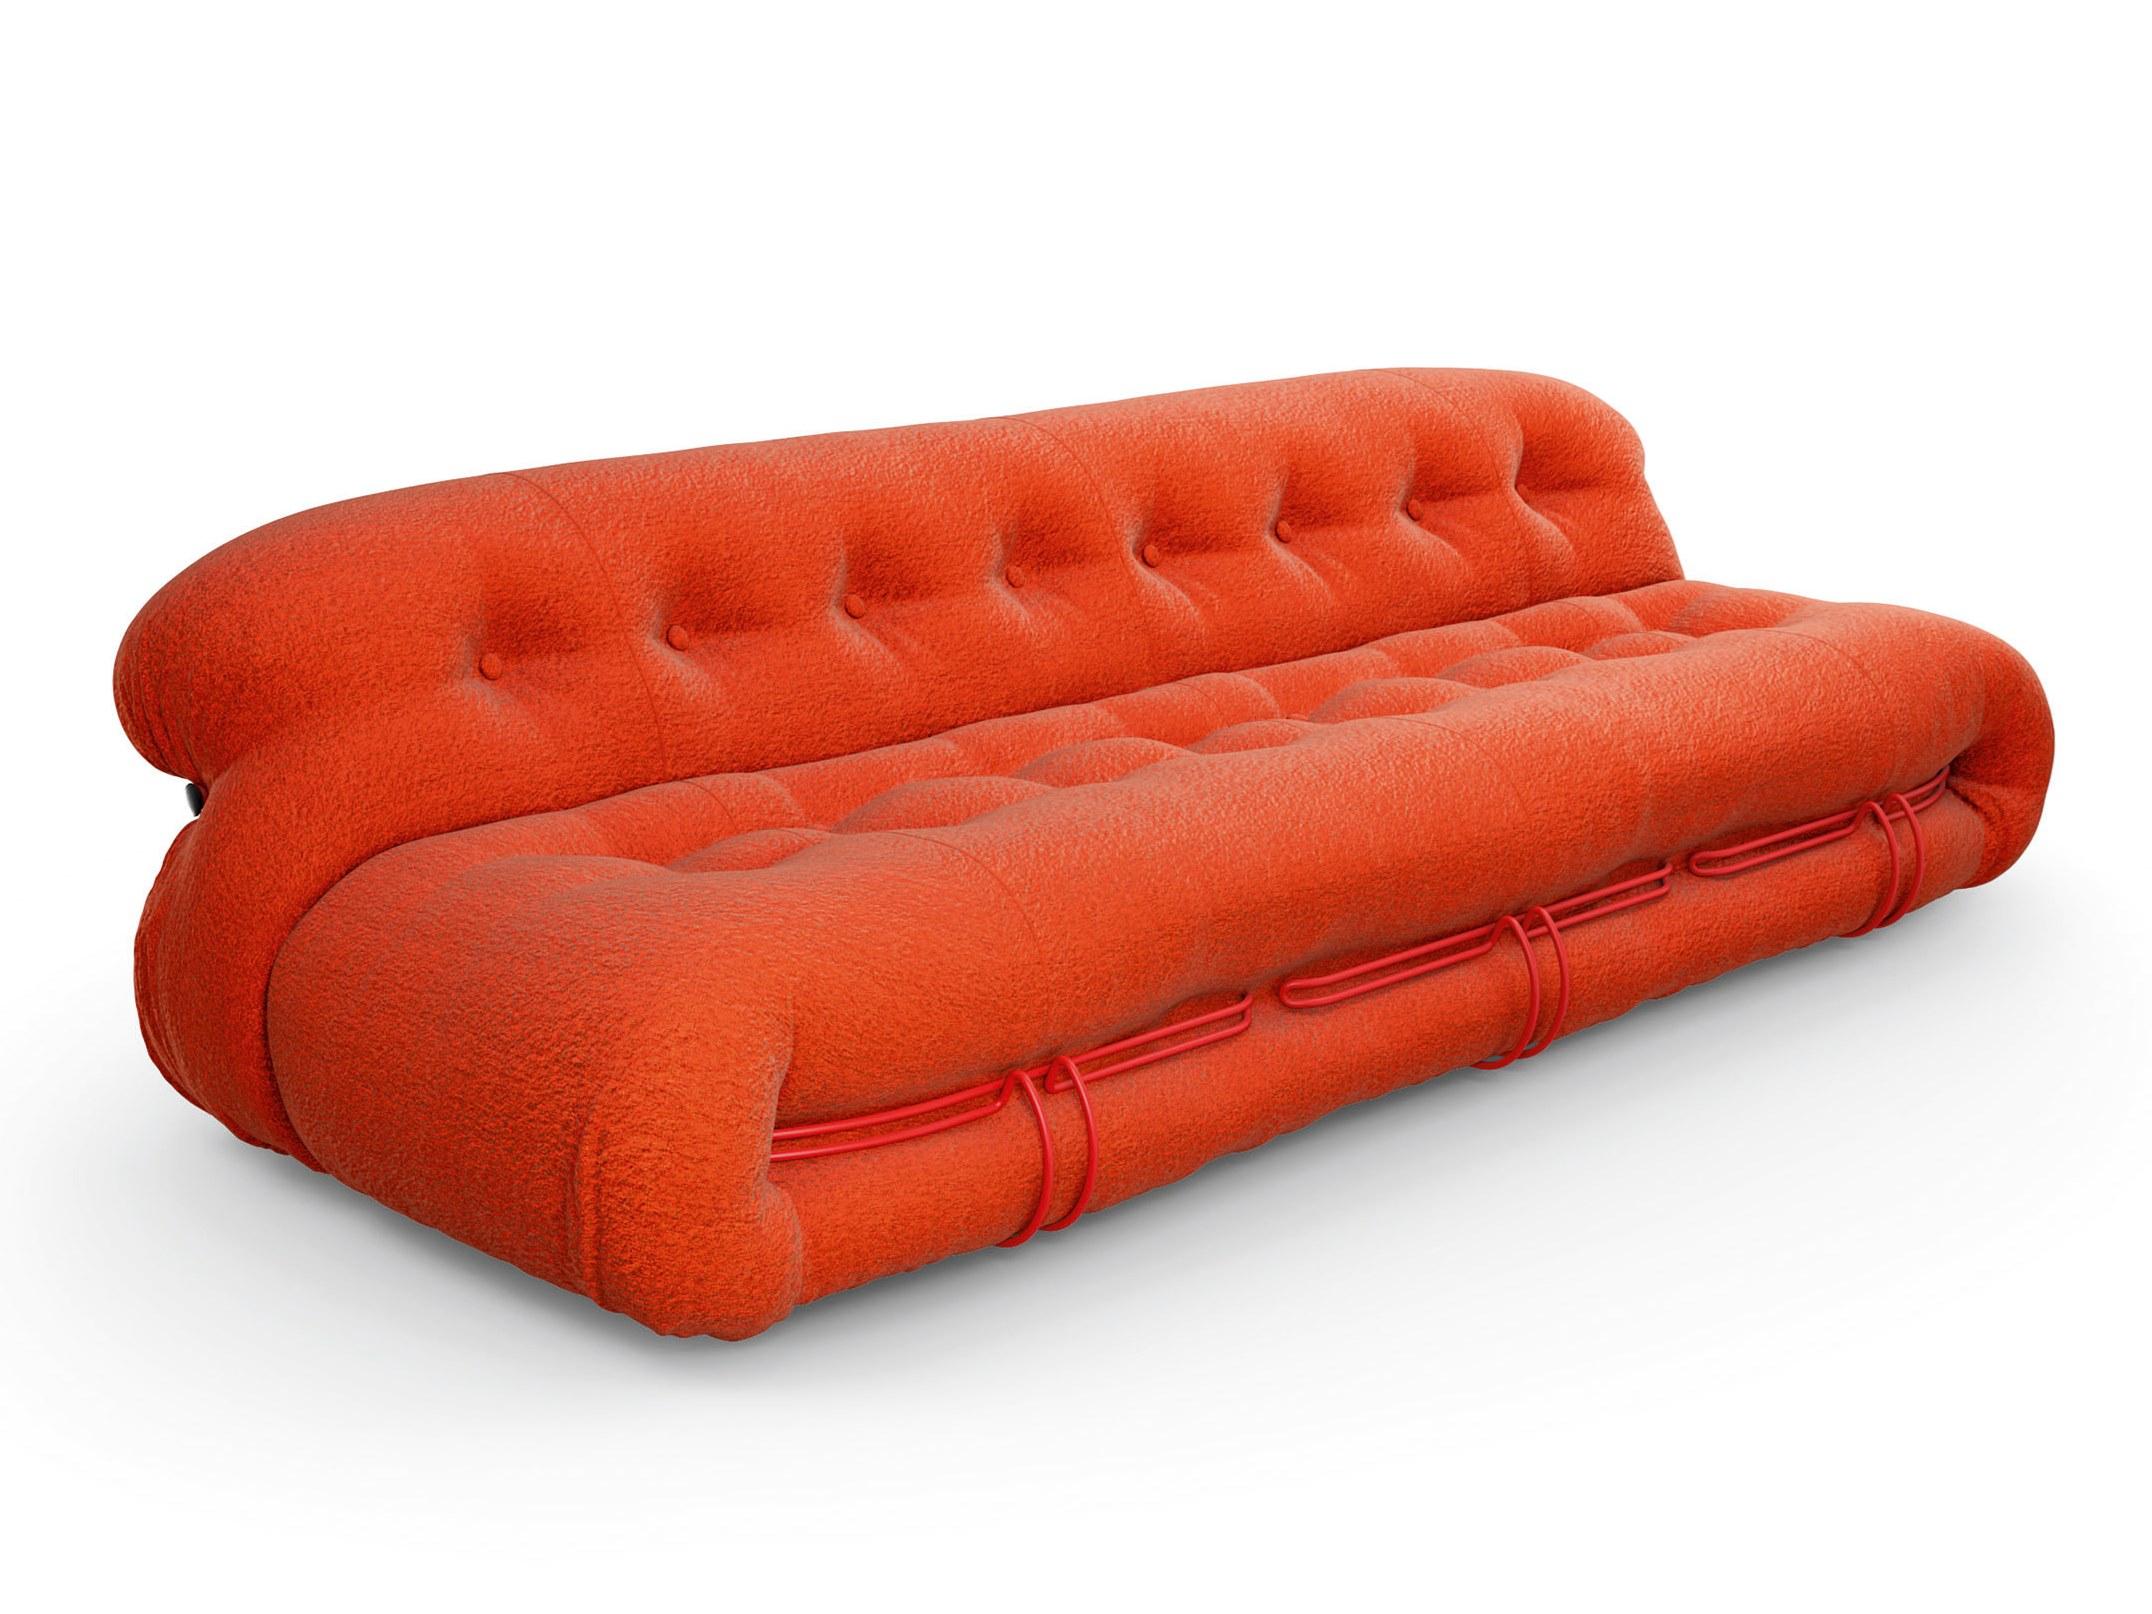 Three Seater Sofa model Soriana designed by Tobia Scarpa in 1969.
Manufactured by Cassina in Italy.

A design armchair with soft, generous contours, designed to bring home casual, sophisticated comfort that opens the door to new, freer